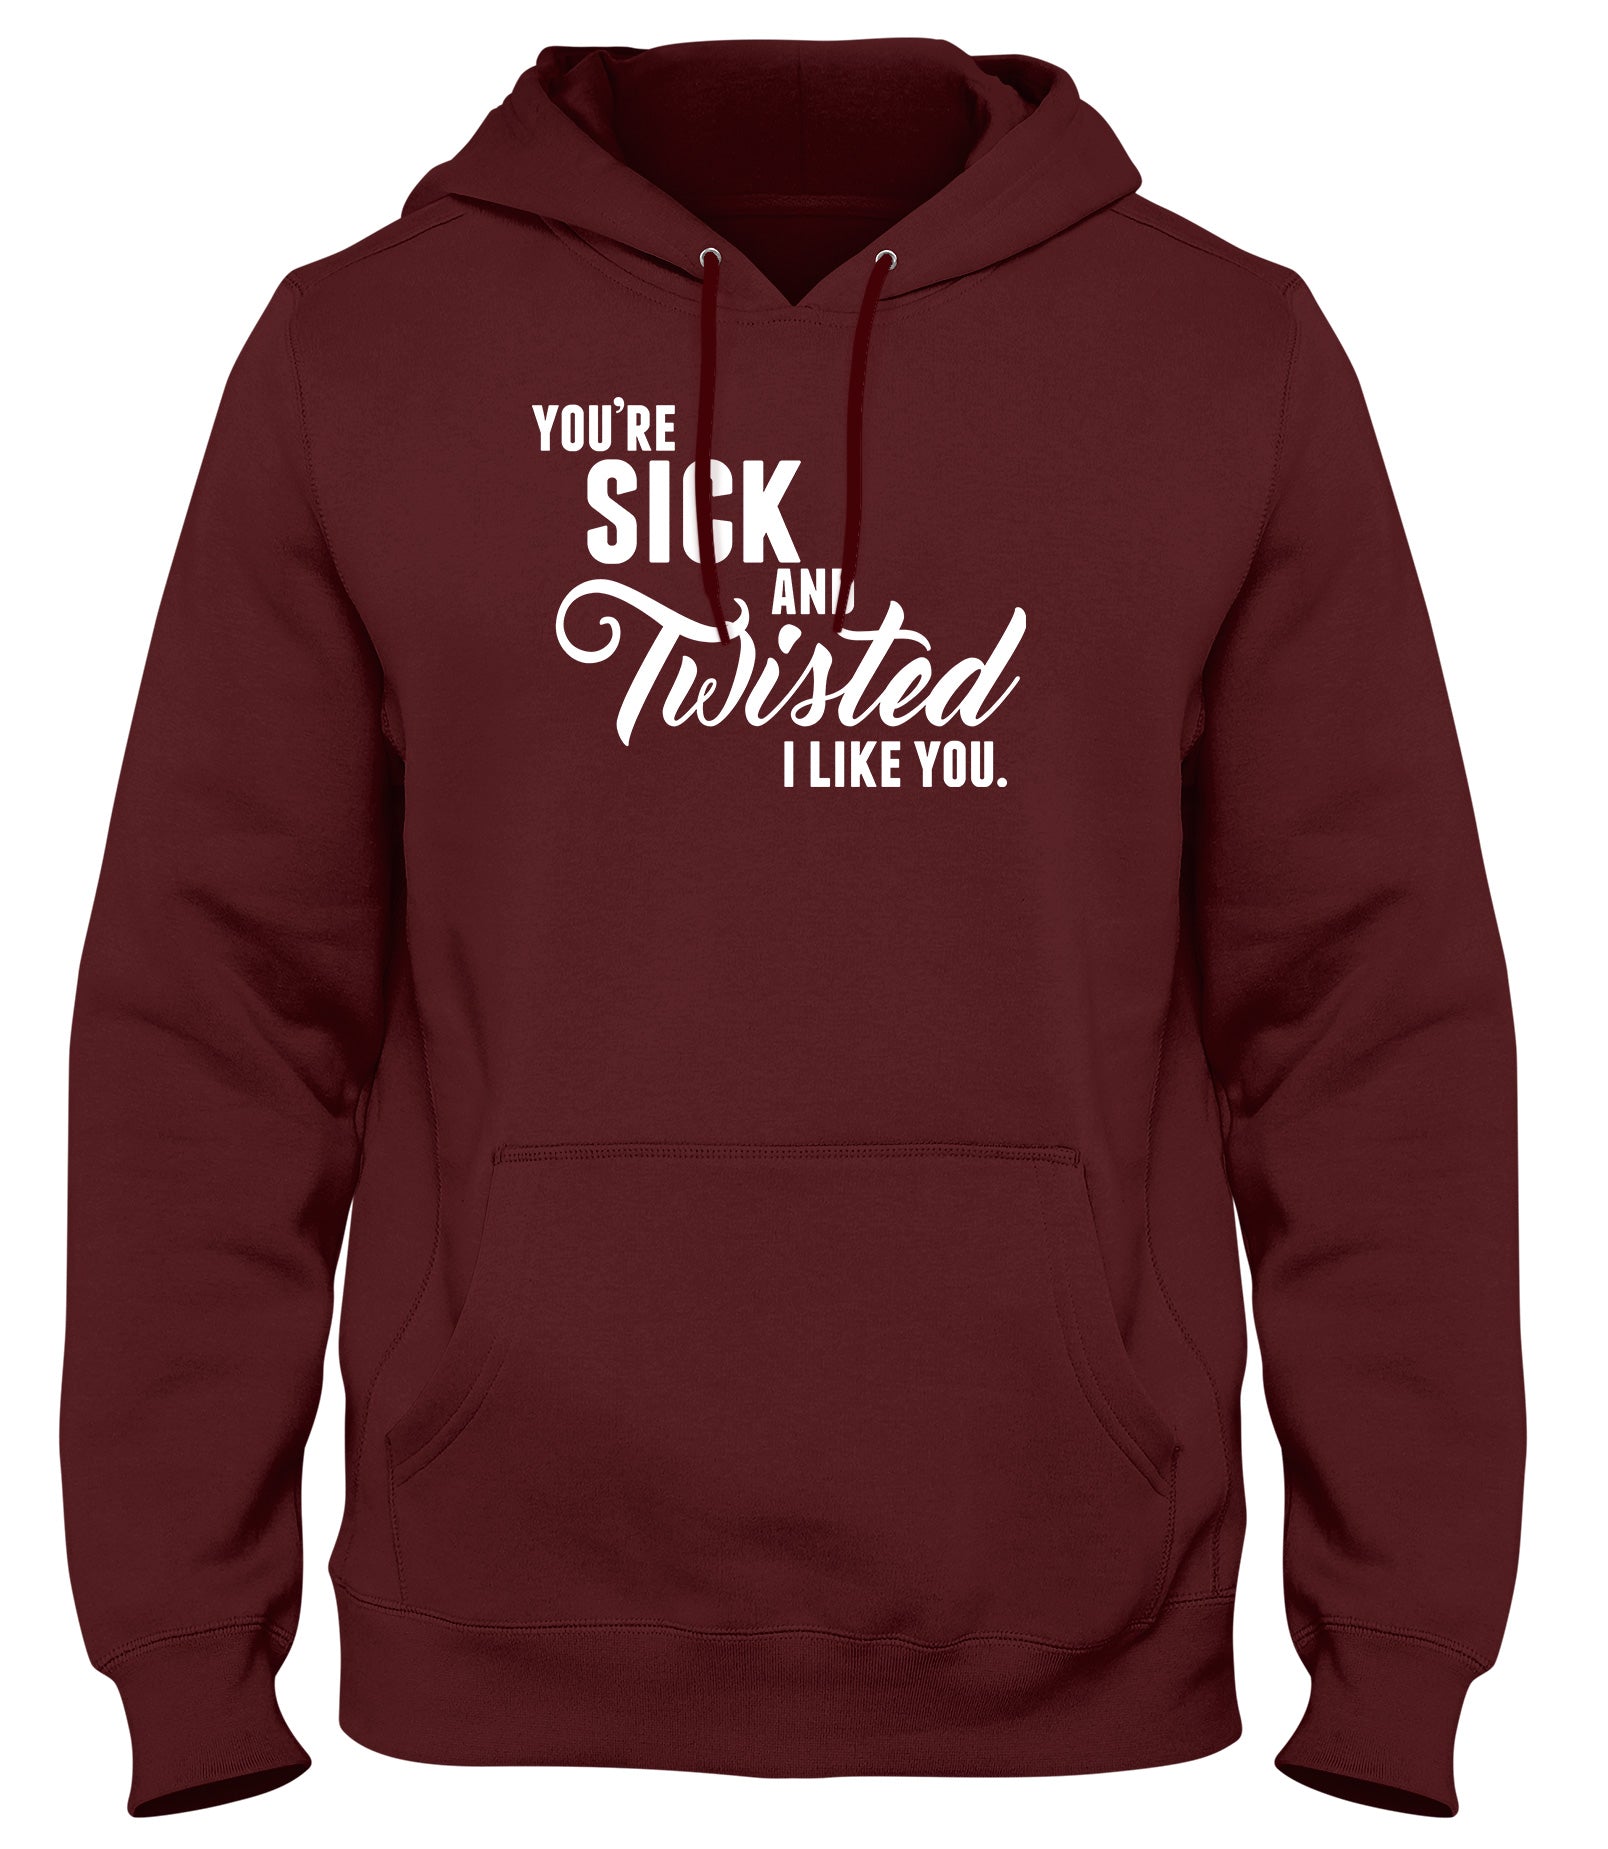 YOU'RE SICK AND TWISTED  I LIKE YOU MENS LADIES WOMENS UNISEX HOODIE